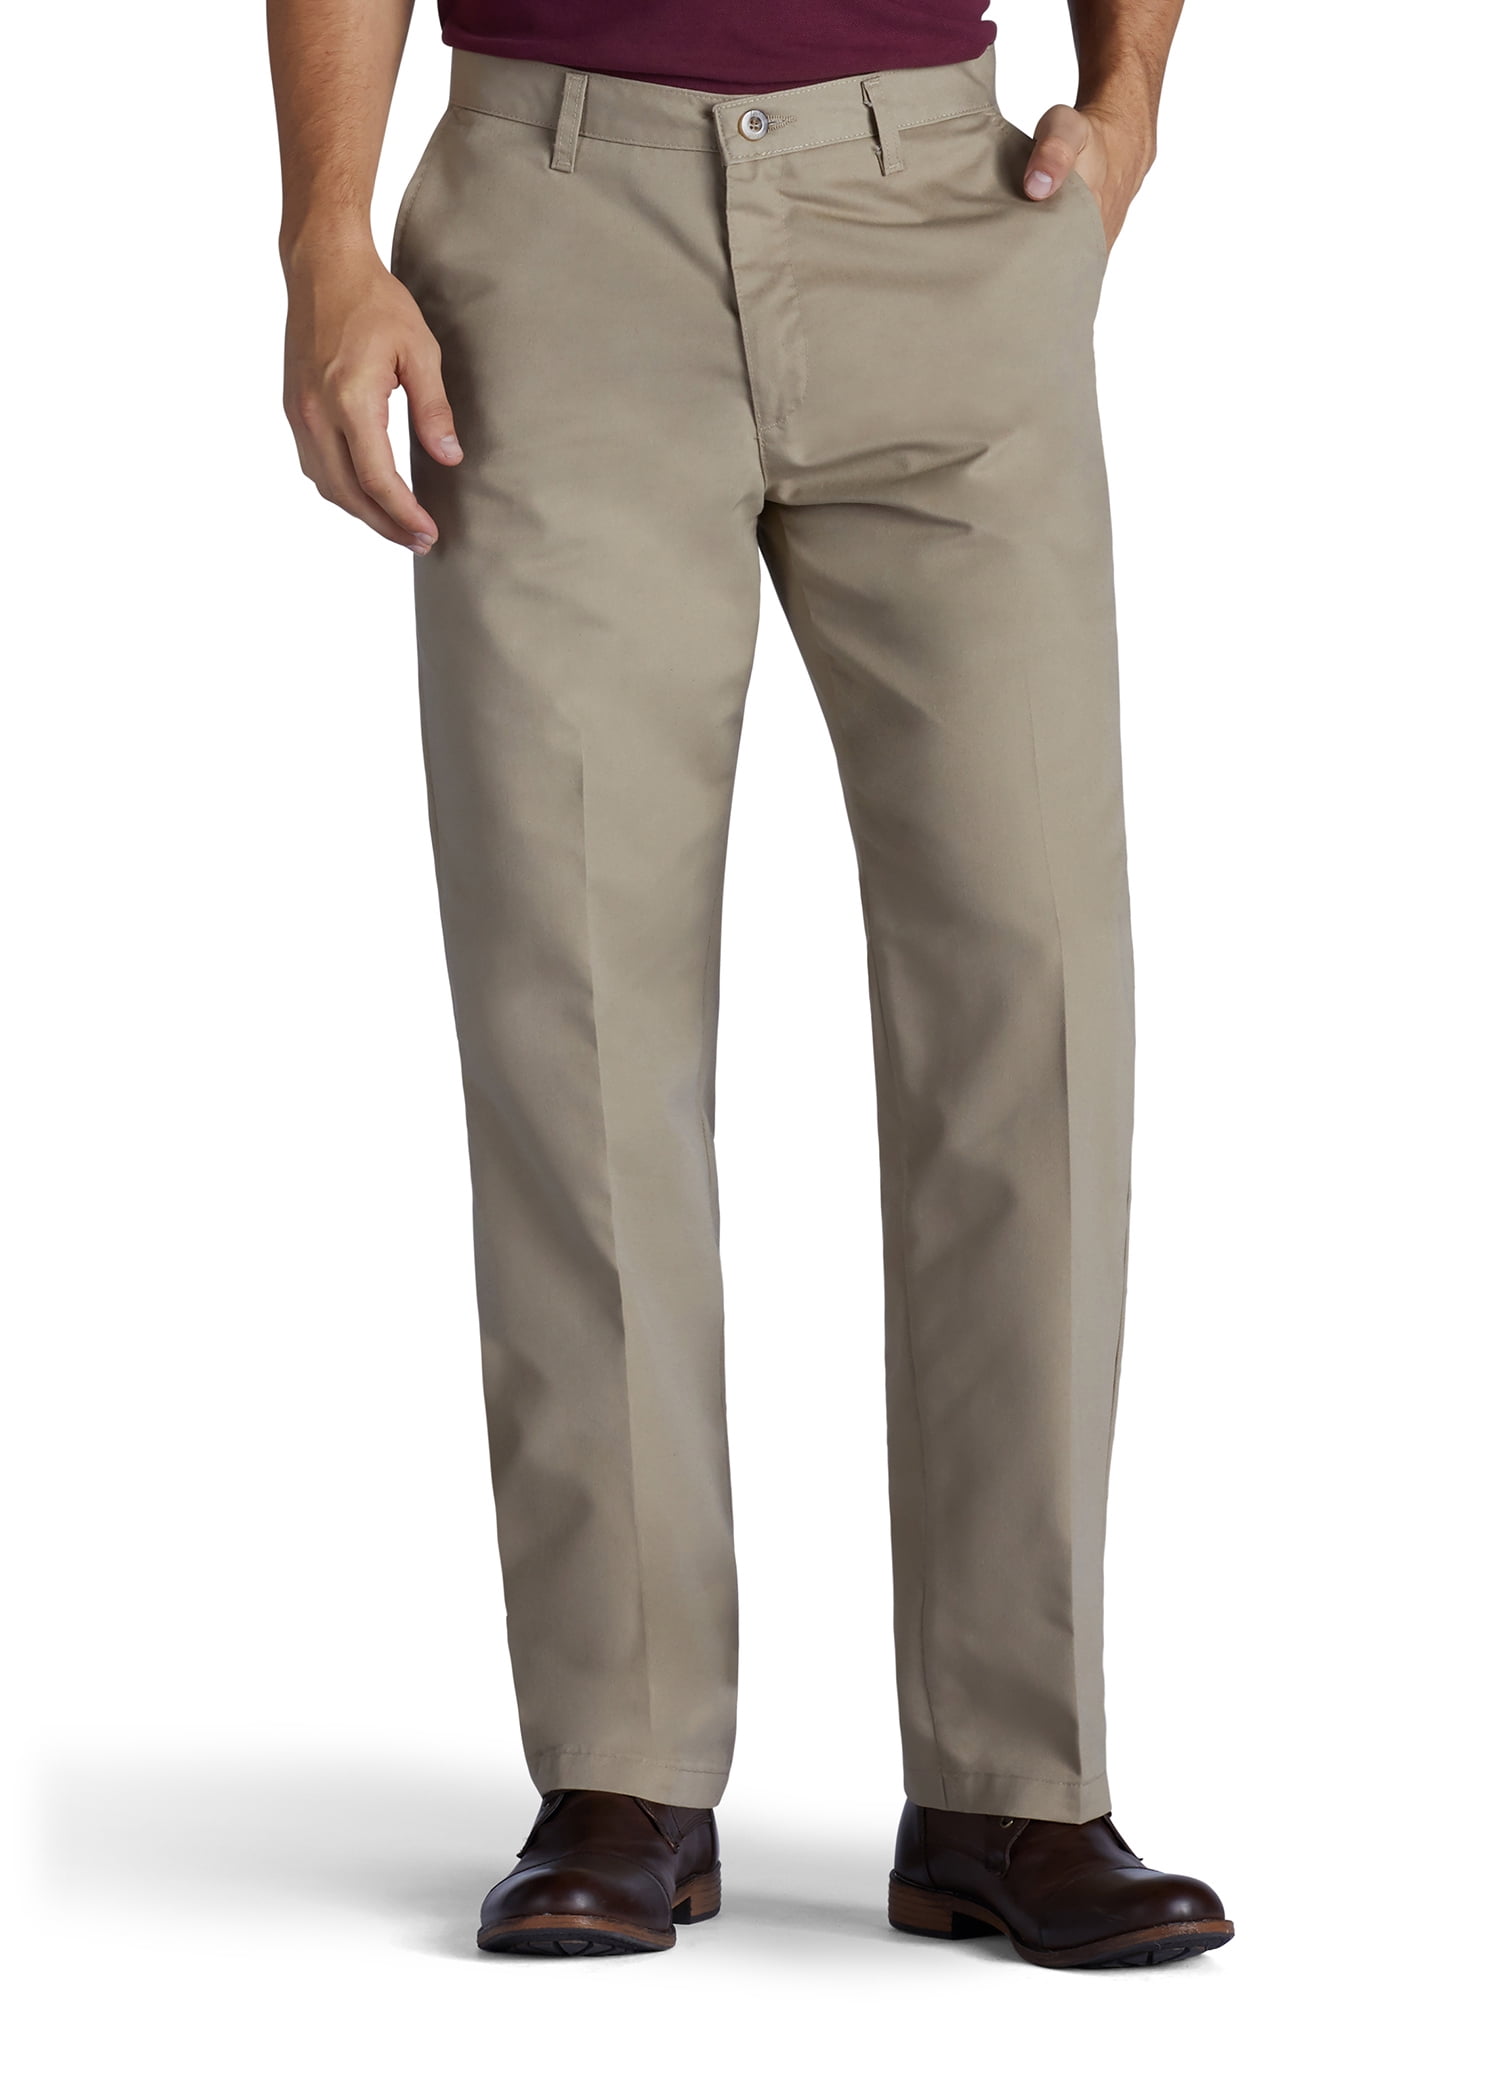 Lee Men's Total Freedom Relaxed Classic Fit Flat Front Pant